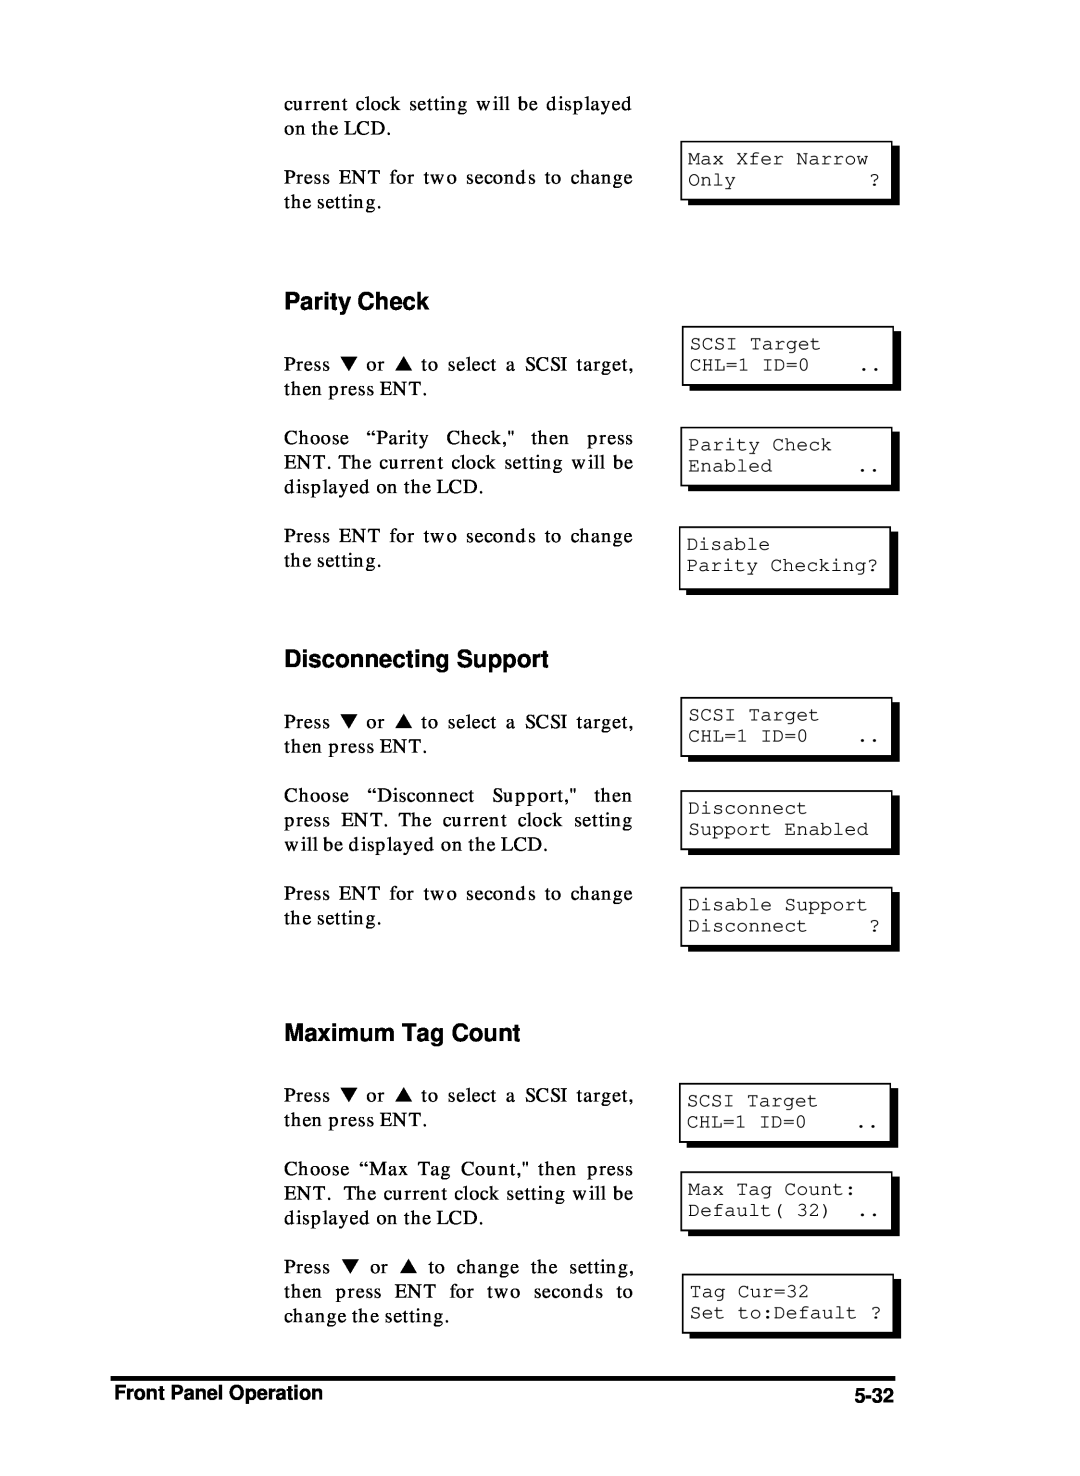 Compaq Infortrend manual Parity Check, Disconnecting Support, Maximum Tag Count, Front Panel Operation, 5-32 